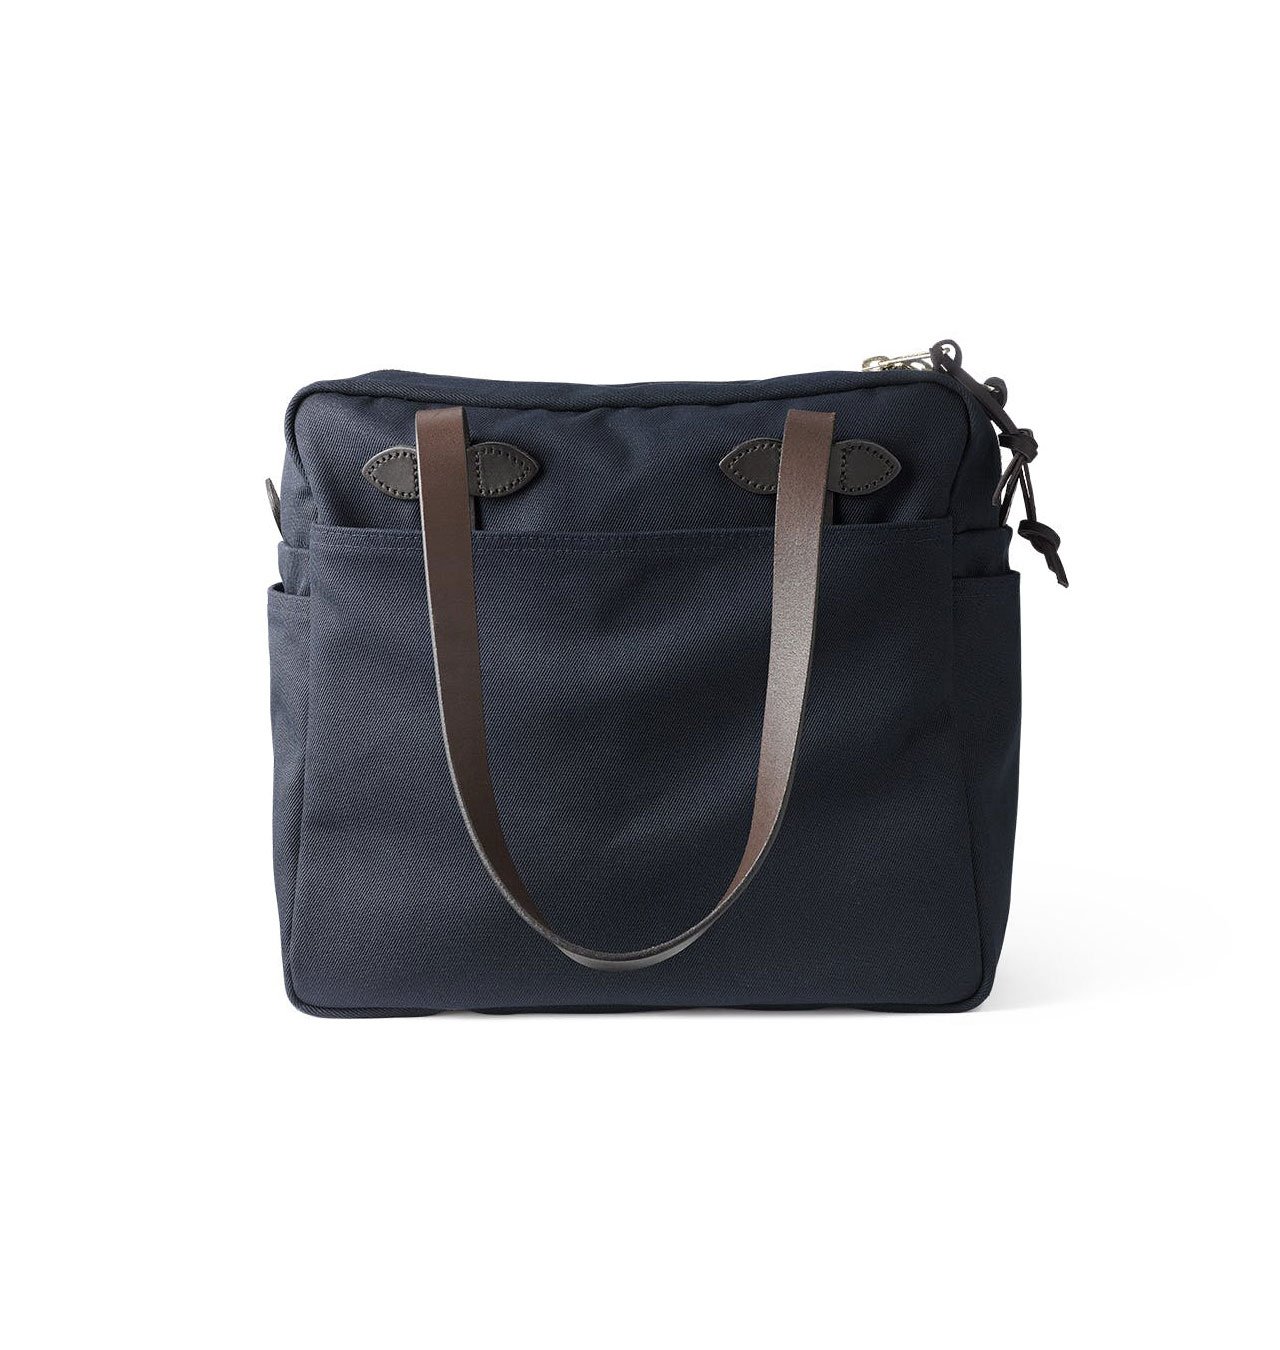 filson-11070261-tote-bag-with-zipper-navy-01234